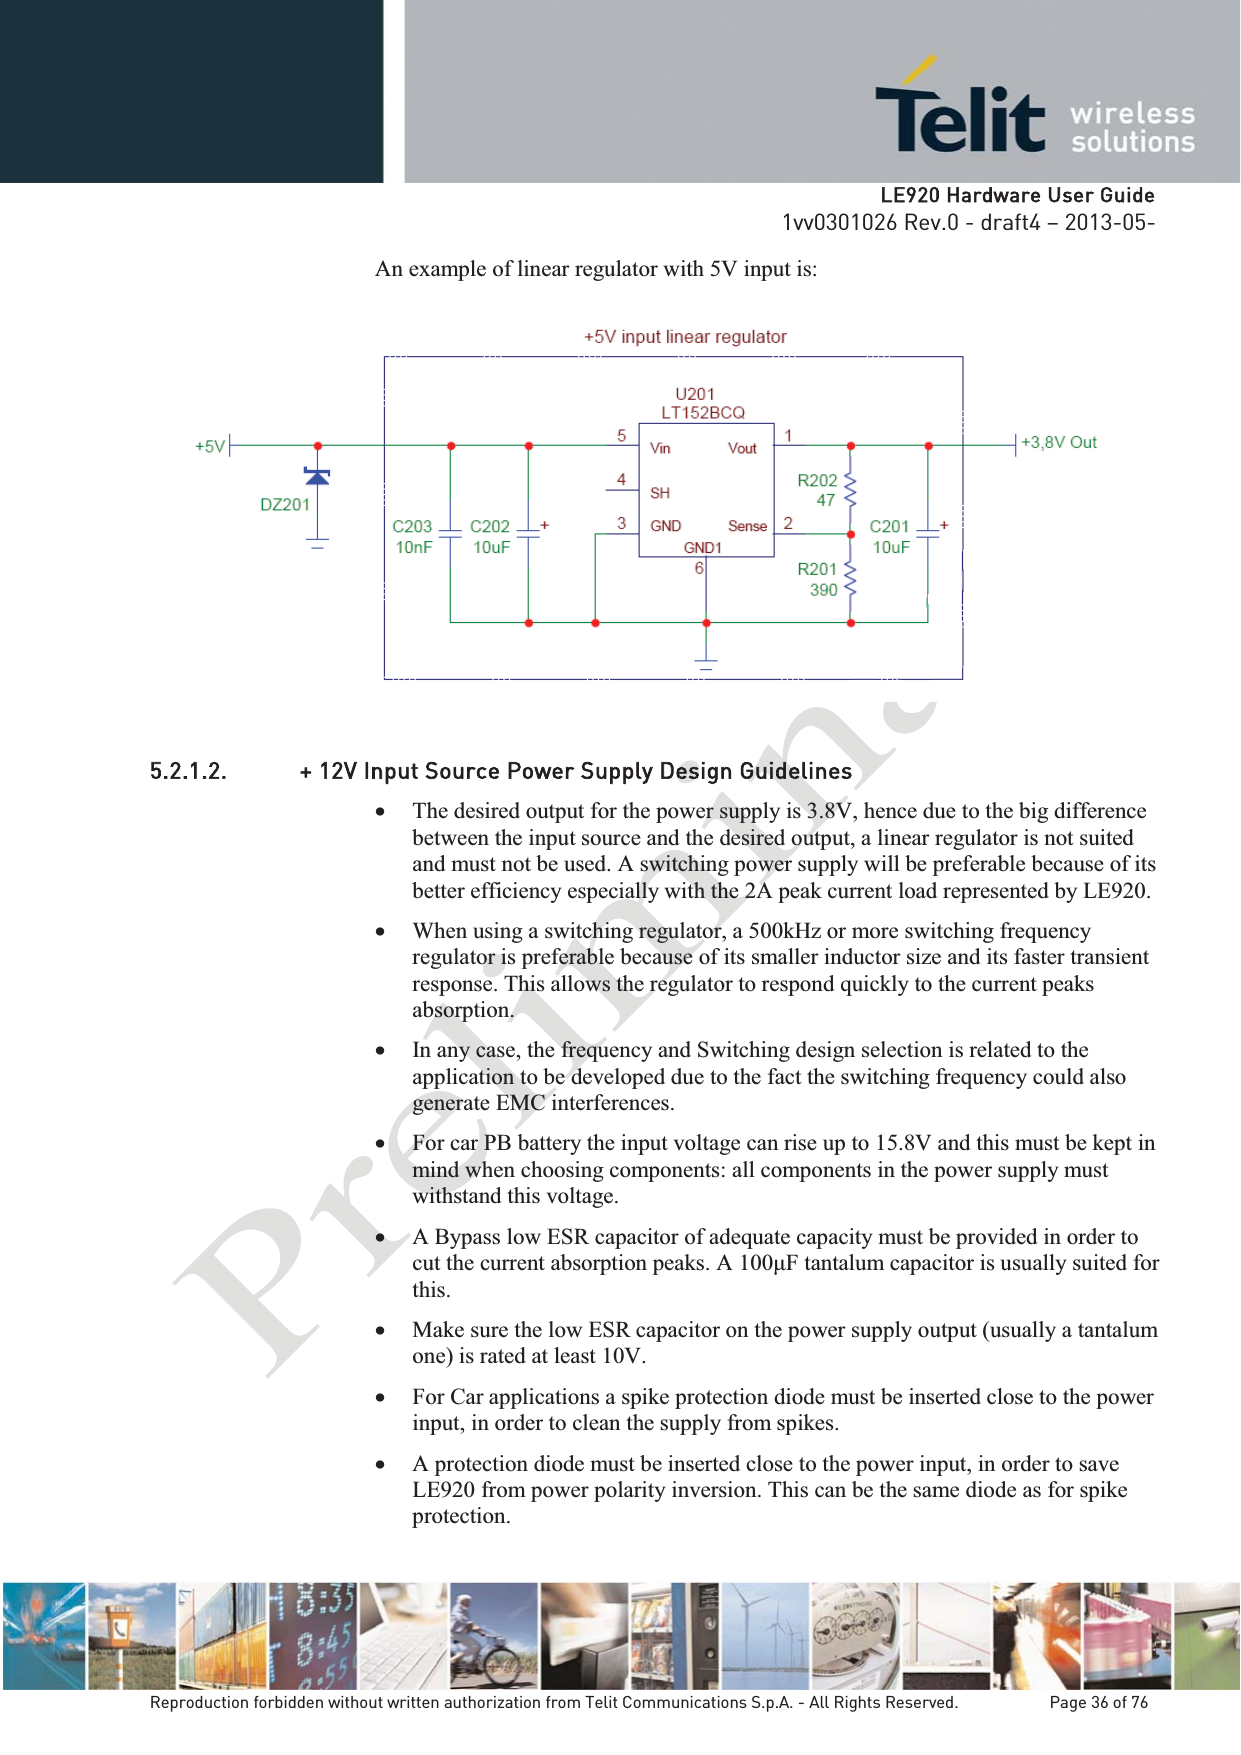   LLE920 Hardware User Guide1vv0301026 Rev.0 - draft4 – 2013-05-Reproduction forbidden without written authorization from Telit Communications S.p.A. - All Rights Reserved.    Page 36 of 76 An example of linear regulator with 5V input is:  5.2.1.2. + 12V Input Source Power Supply Design Guidelines x The desired output for the power supply is 3.8V, hence due to the big difference between the input source and the desired output, a linear regulator is not suited and must not be used. A switching power supply will be preferable because of its better efficiency especially with the 2A peak current load represented by LE920.  x When using a switching regulator, a 500kHz or more switching frequency regulator is preferable because of its smaller inductor size and its faster transient response. This allows the regulator to respond quickly to the current peaks absorption.  x In any case, the frequency and Switching design selection is related to the application to be developed due to the fact the switching frequency could also generate EMC interferences. x For car PB battery the input voltage can rise up to 15.8V and this must be kept in mind when choosing components: all components in the power supply must withstand this voltage. x A Bypass low ESR capacitor of adequate capacity must be provided in order to s usually suited for this. x Make sure the low ESR capacitor on the power supply output (usually a tantalum one) is rated at least 10V. x For Car applications a spike protection diode must be inserted close to the power input, in order to clean the supply from spikes.  x A protection diode must be inserted close to the power input, in order to save LE920 from power polarity inversion. This can be the same diode as for spike protection. 